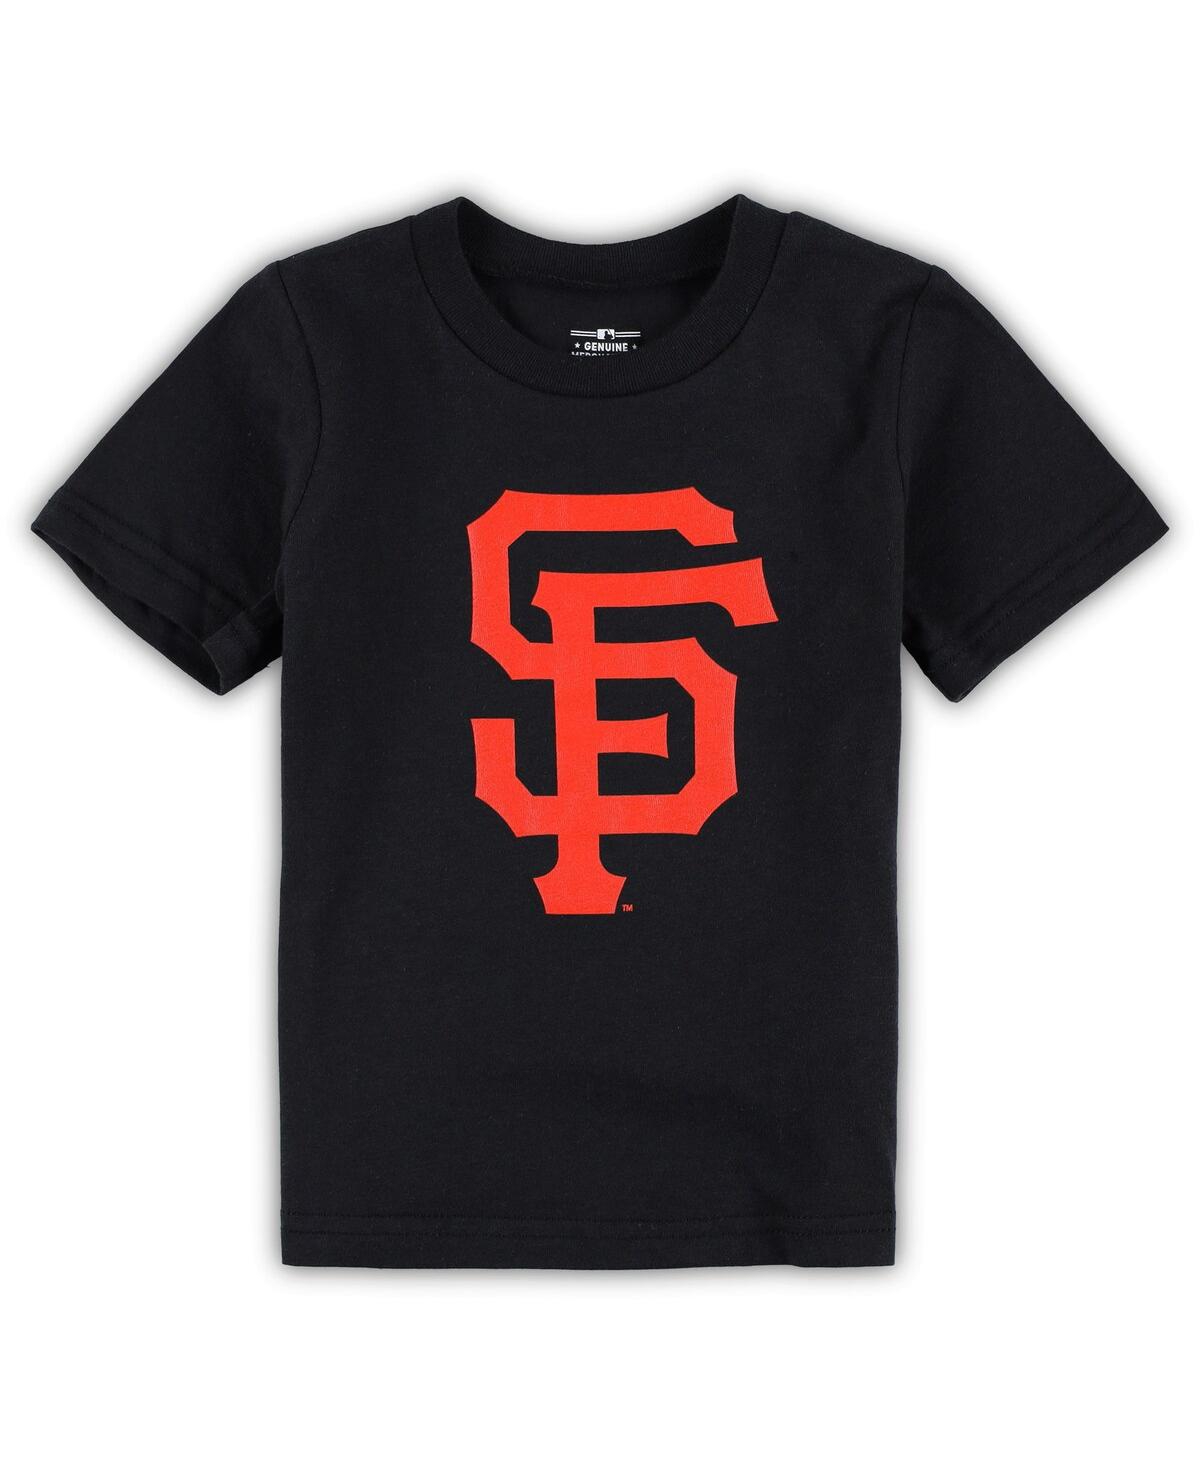 Outerstuff Babies' Toddler Boys And Girls Black San Francisco Giants Team Crew Primary Logo T-shirt